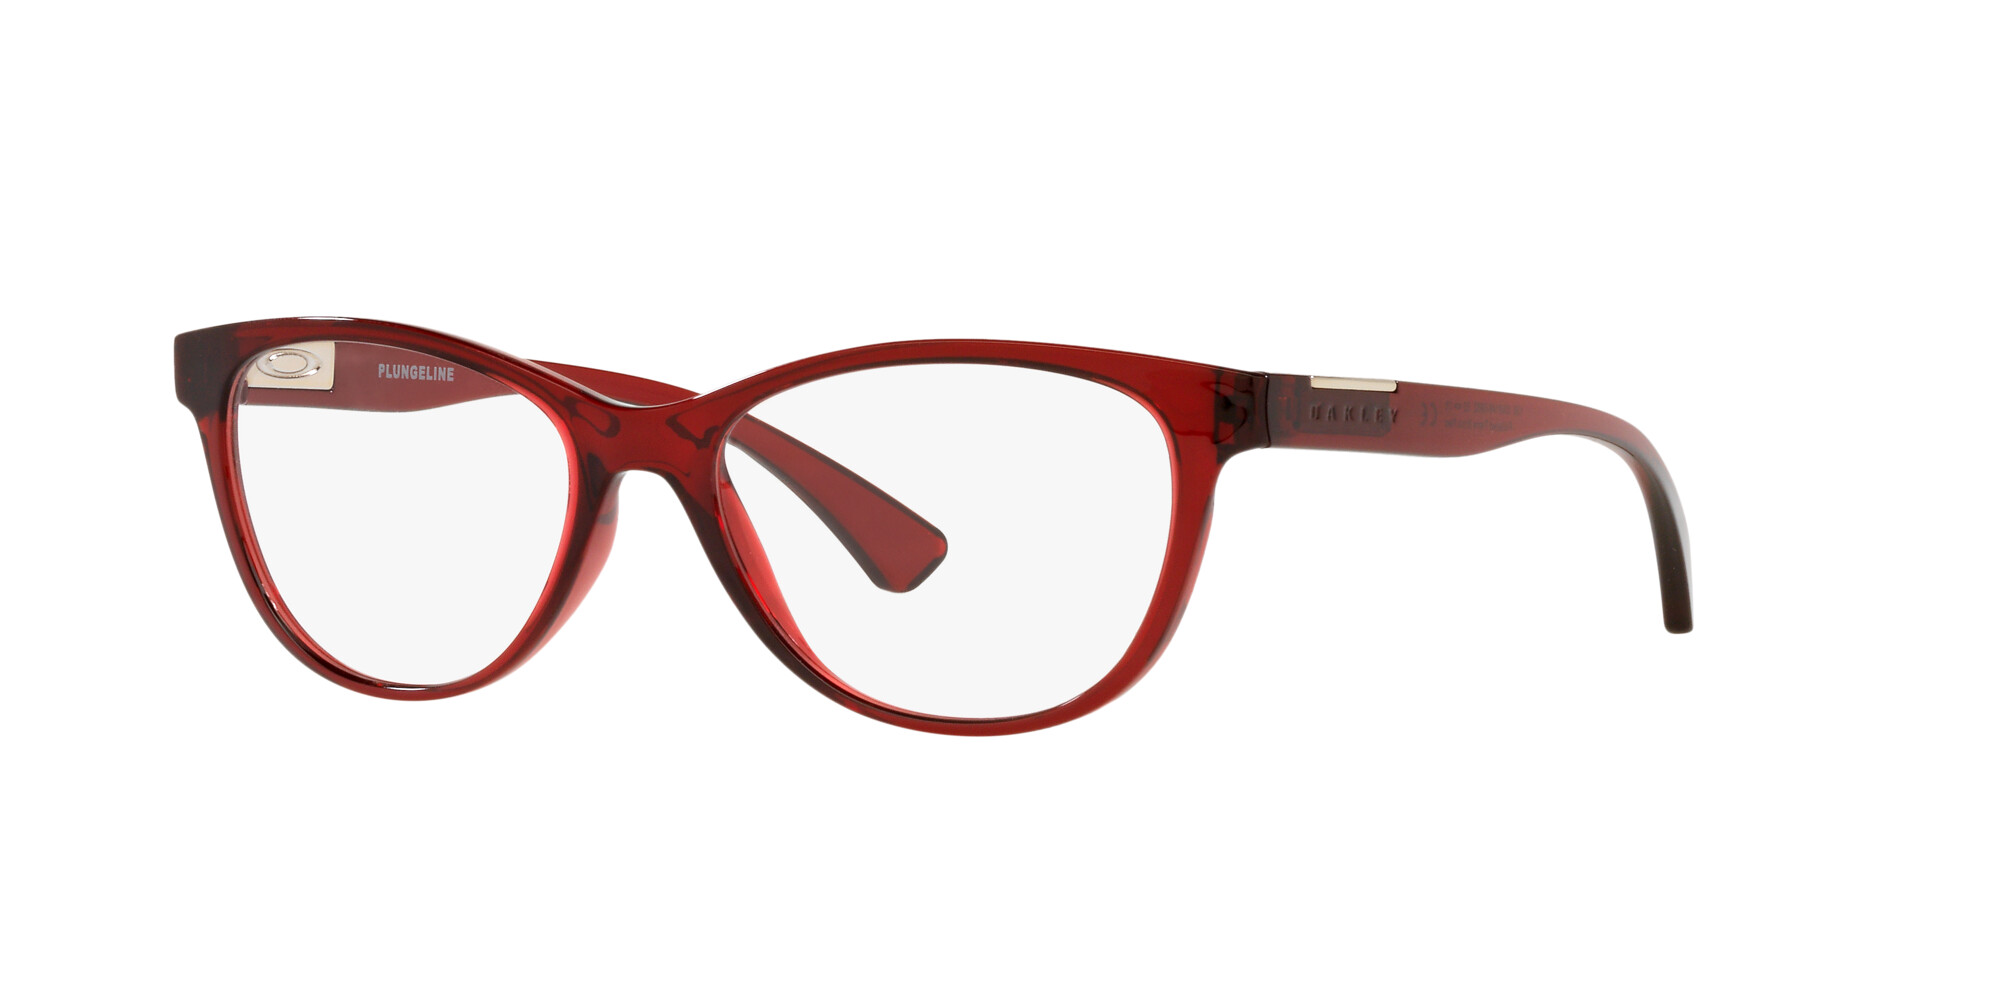 Angle_Left01 Oakley PLUNGELINE 0OX8146 814609 Brille Rot